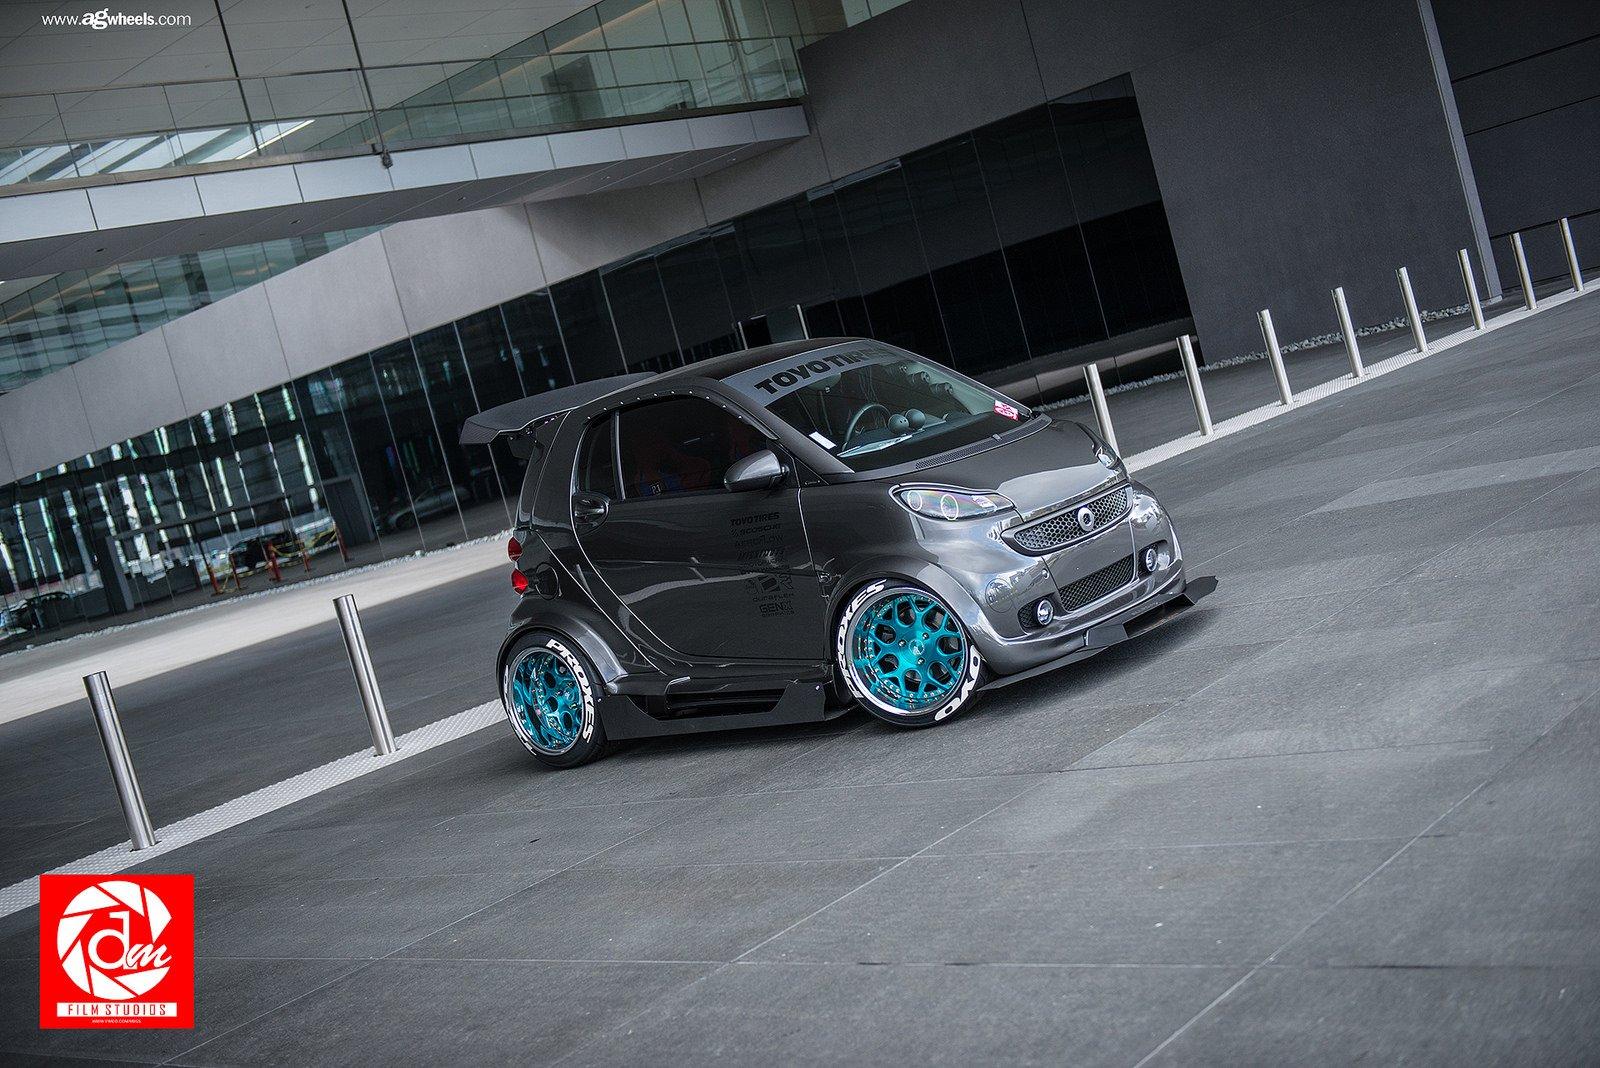 Smart fortwo cars modified wallpaper .wallpaperup.com